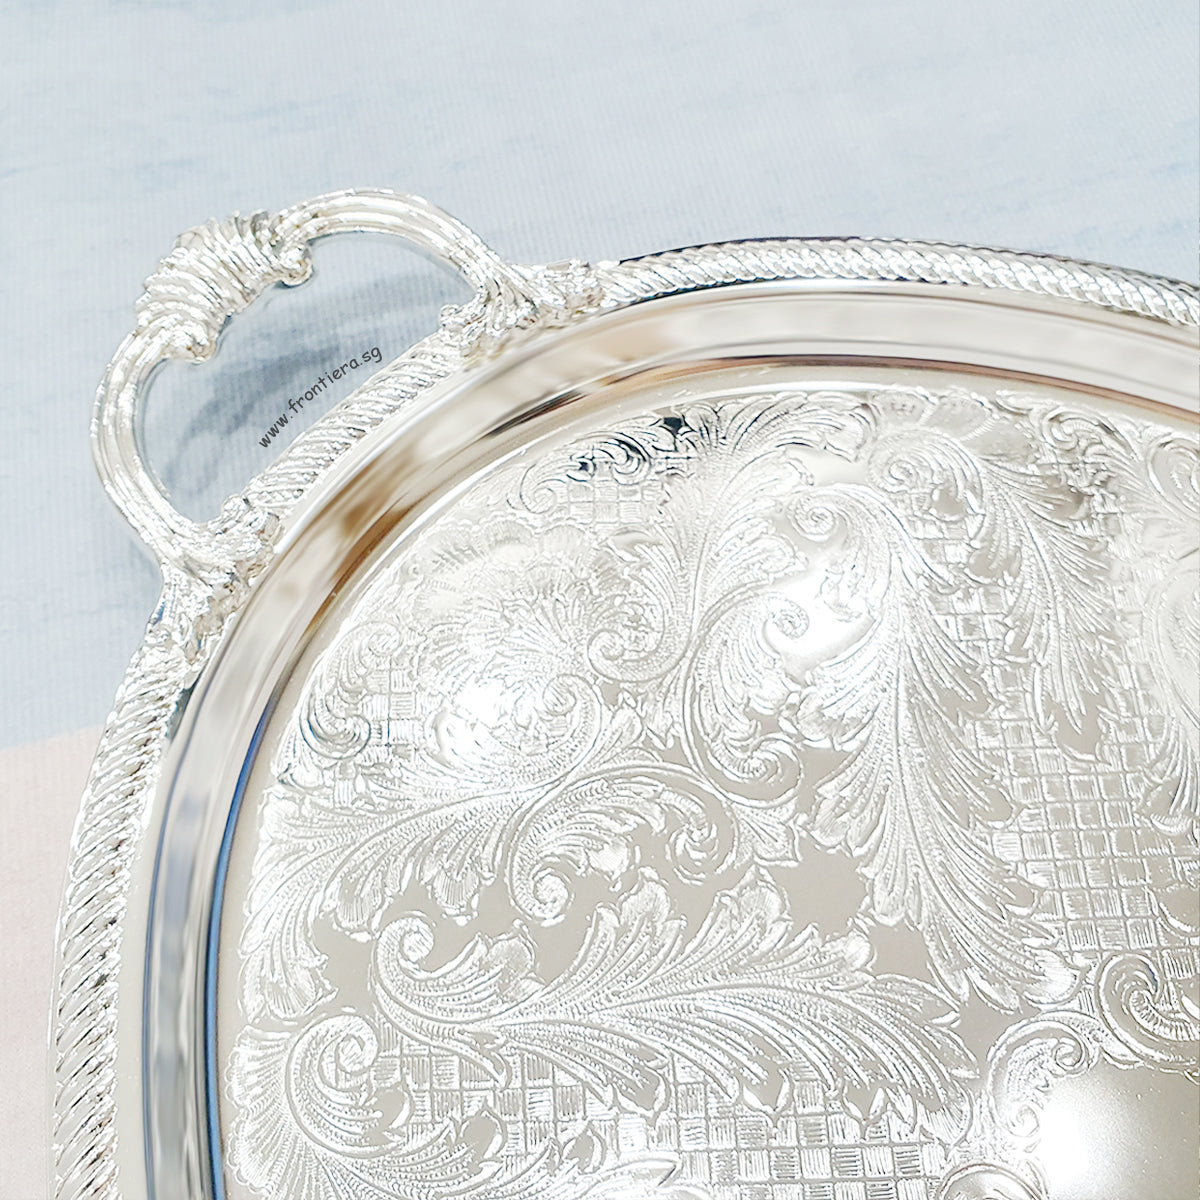 [England Silverware] Shallow Large Oval Serving Tray with Handle 505mm 𝟭𝟬% 𝗢𝗙𝗙